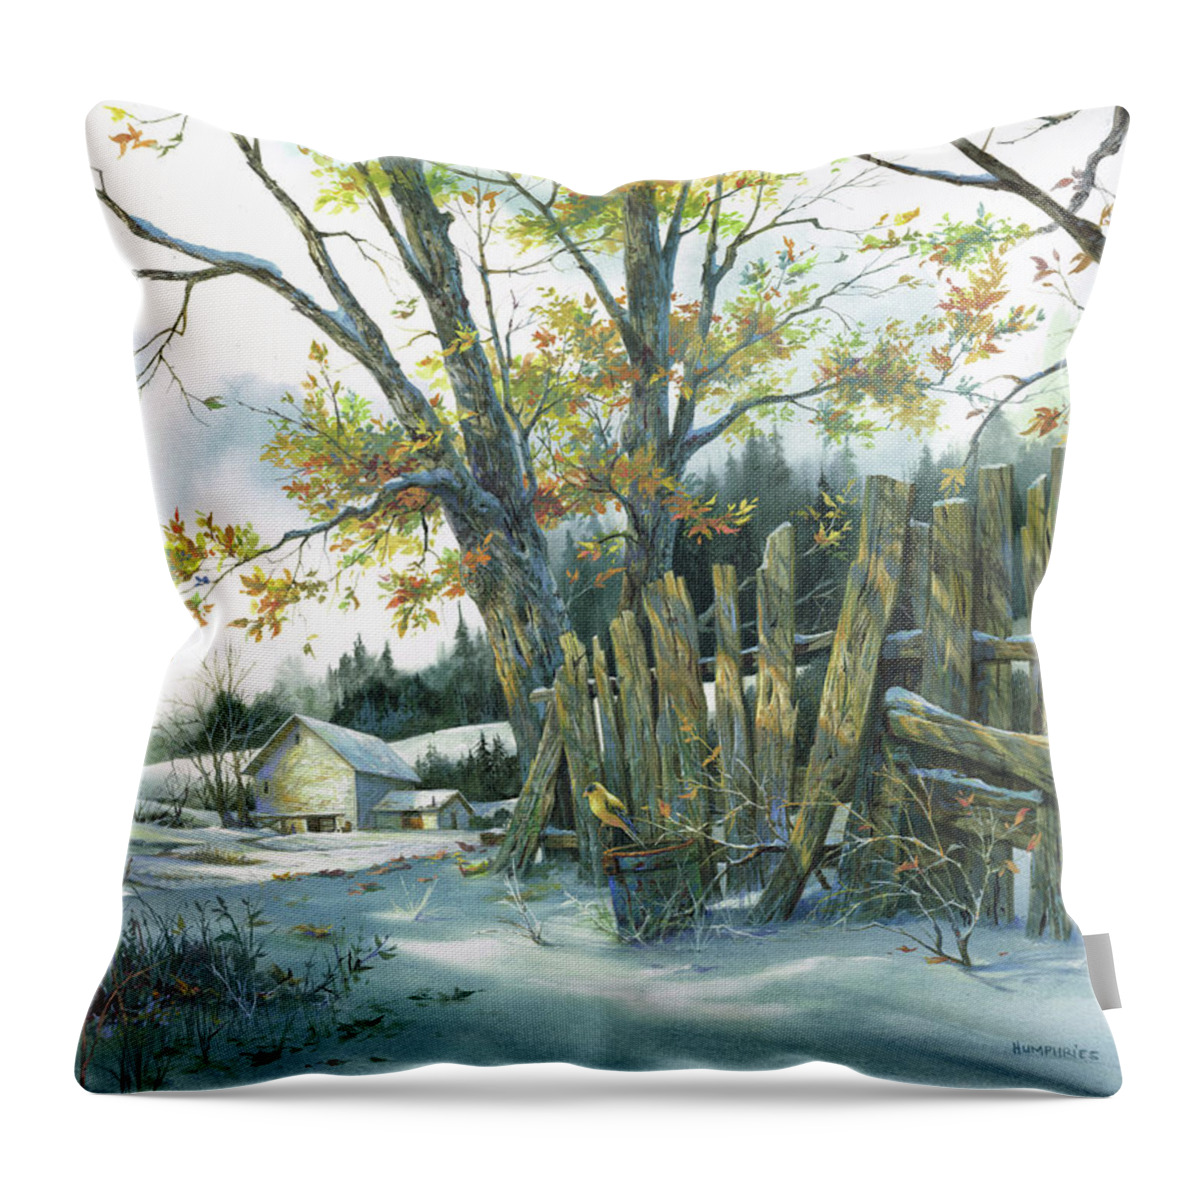 Michael Humphries Throw Pillow featuring the painting Yellow Bird by Michael Humphries